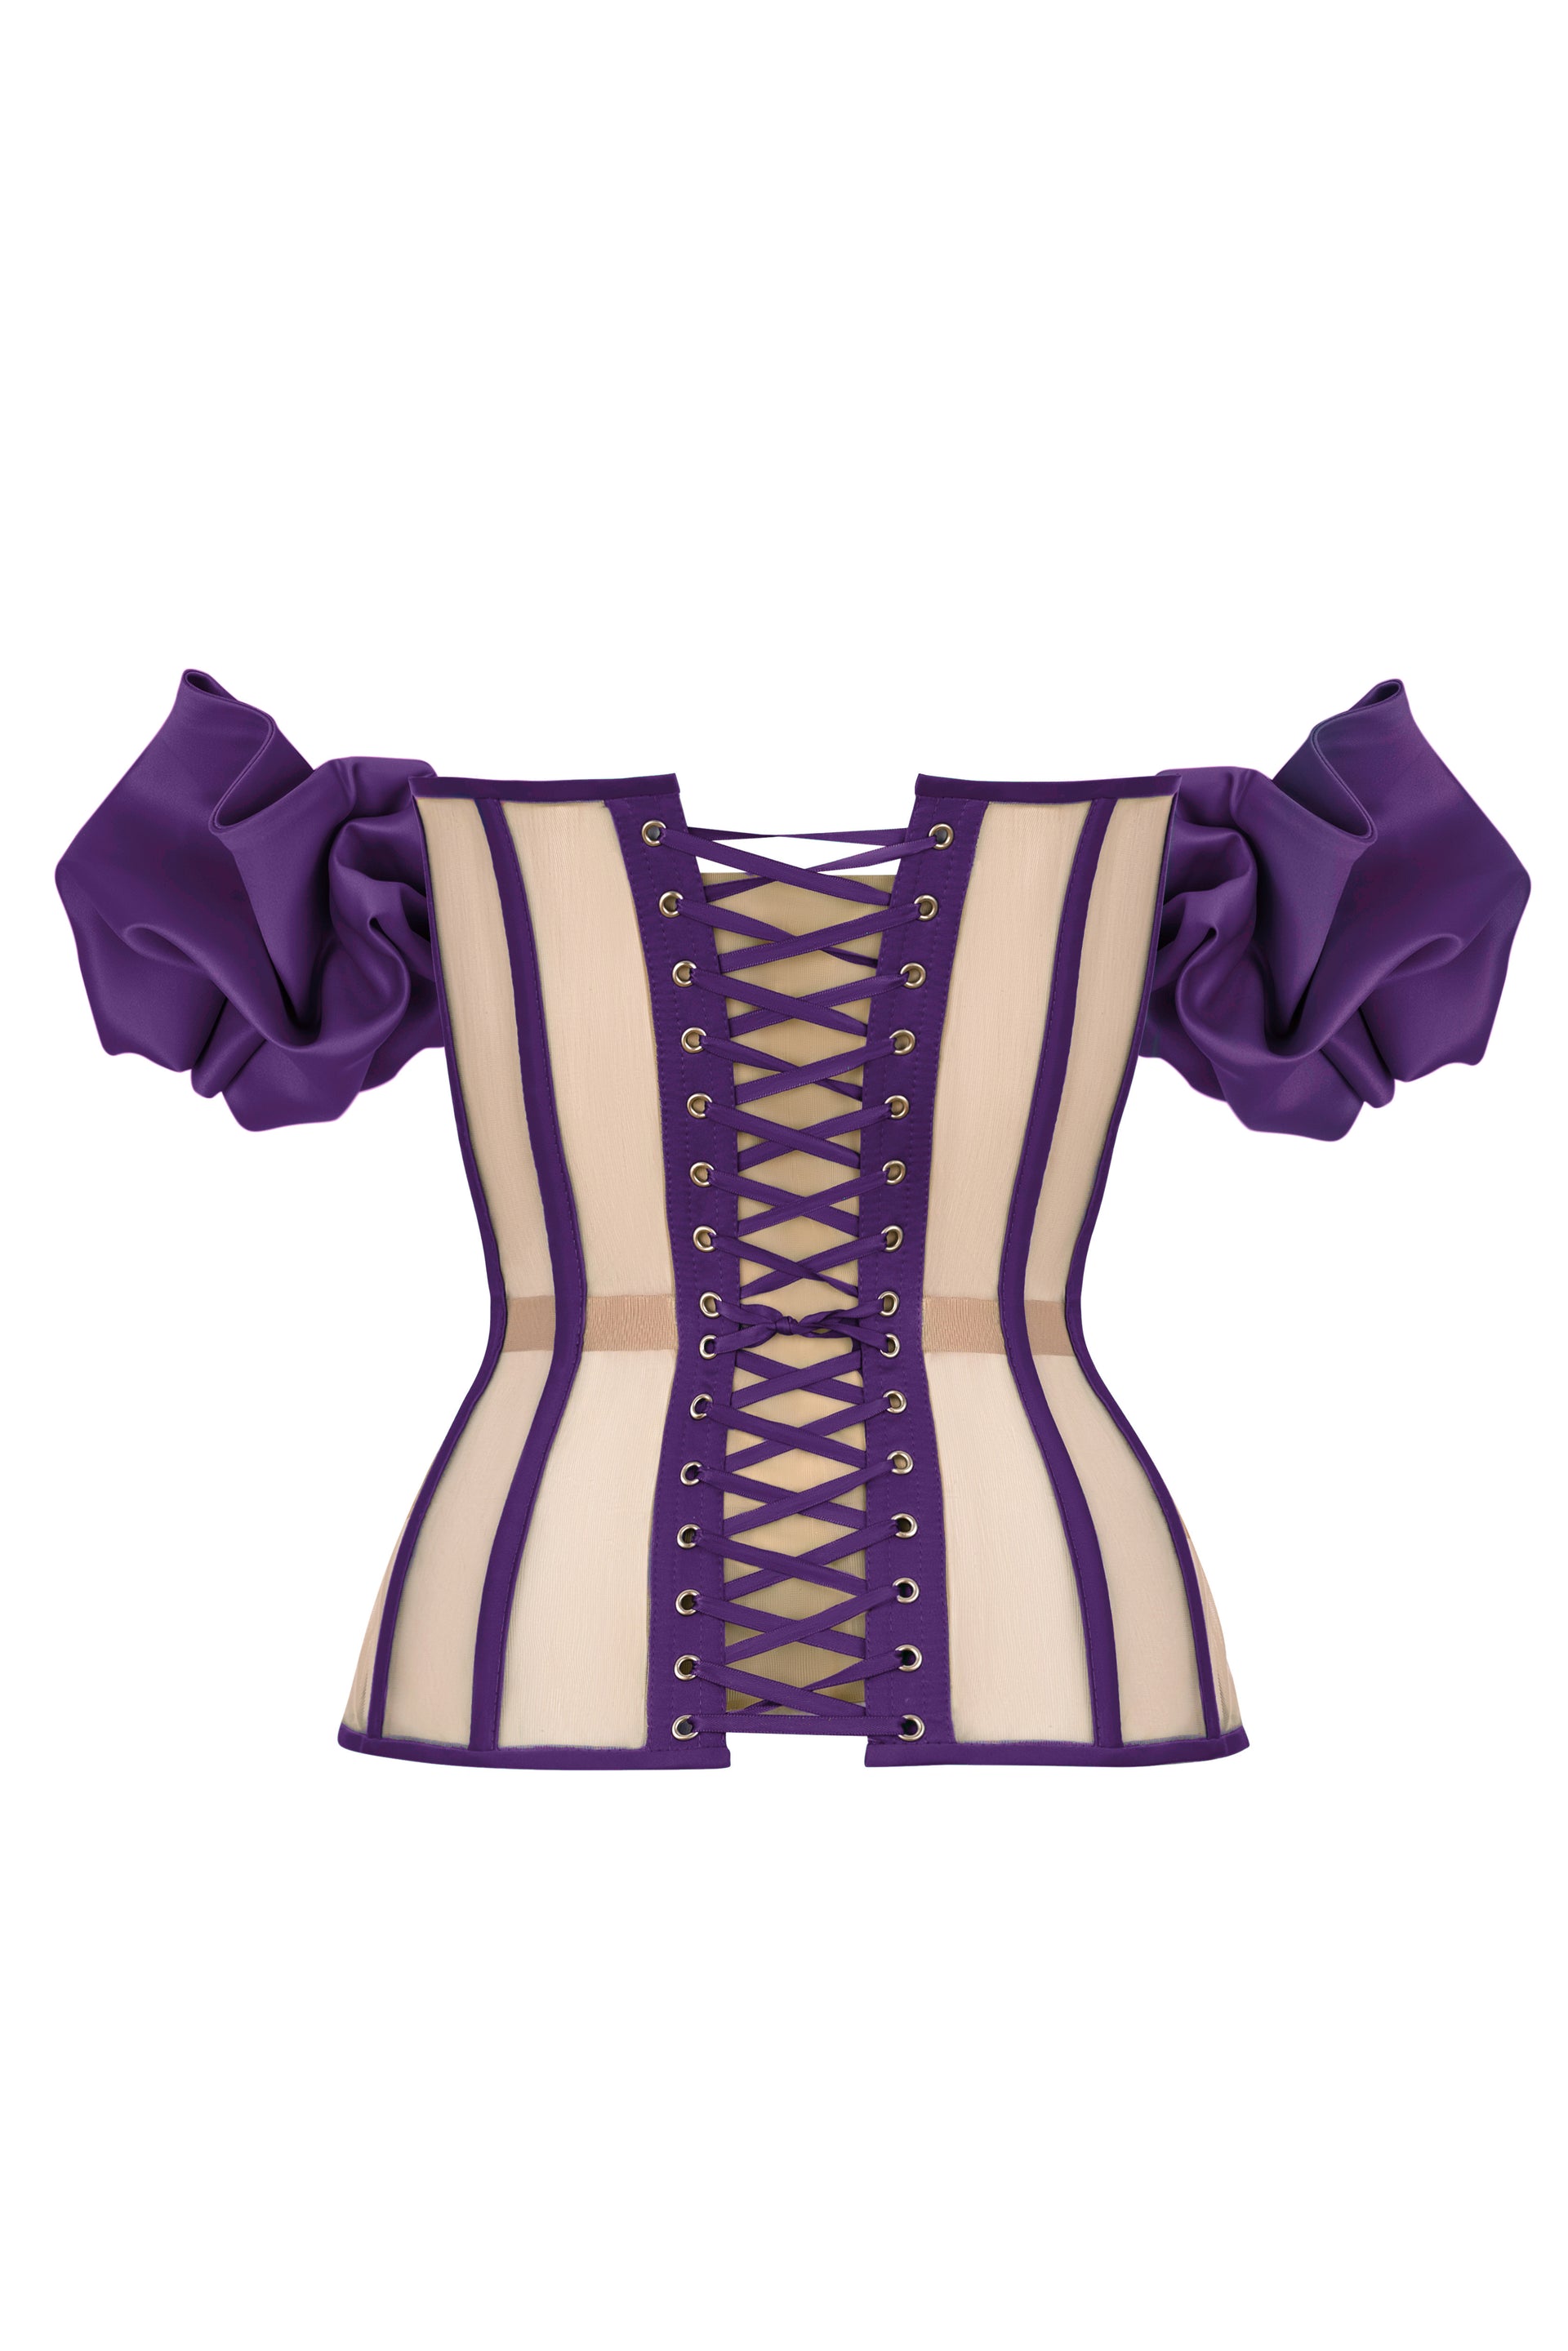 Purple satin corset with transparent back and detachable sleeves